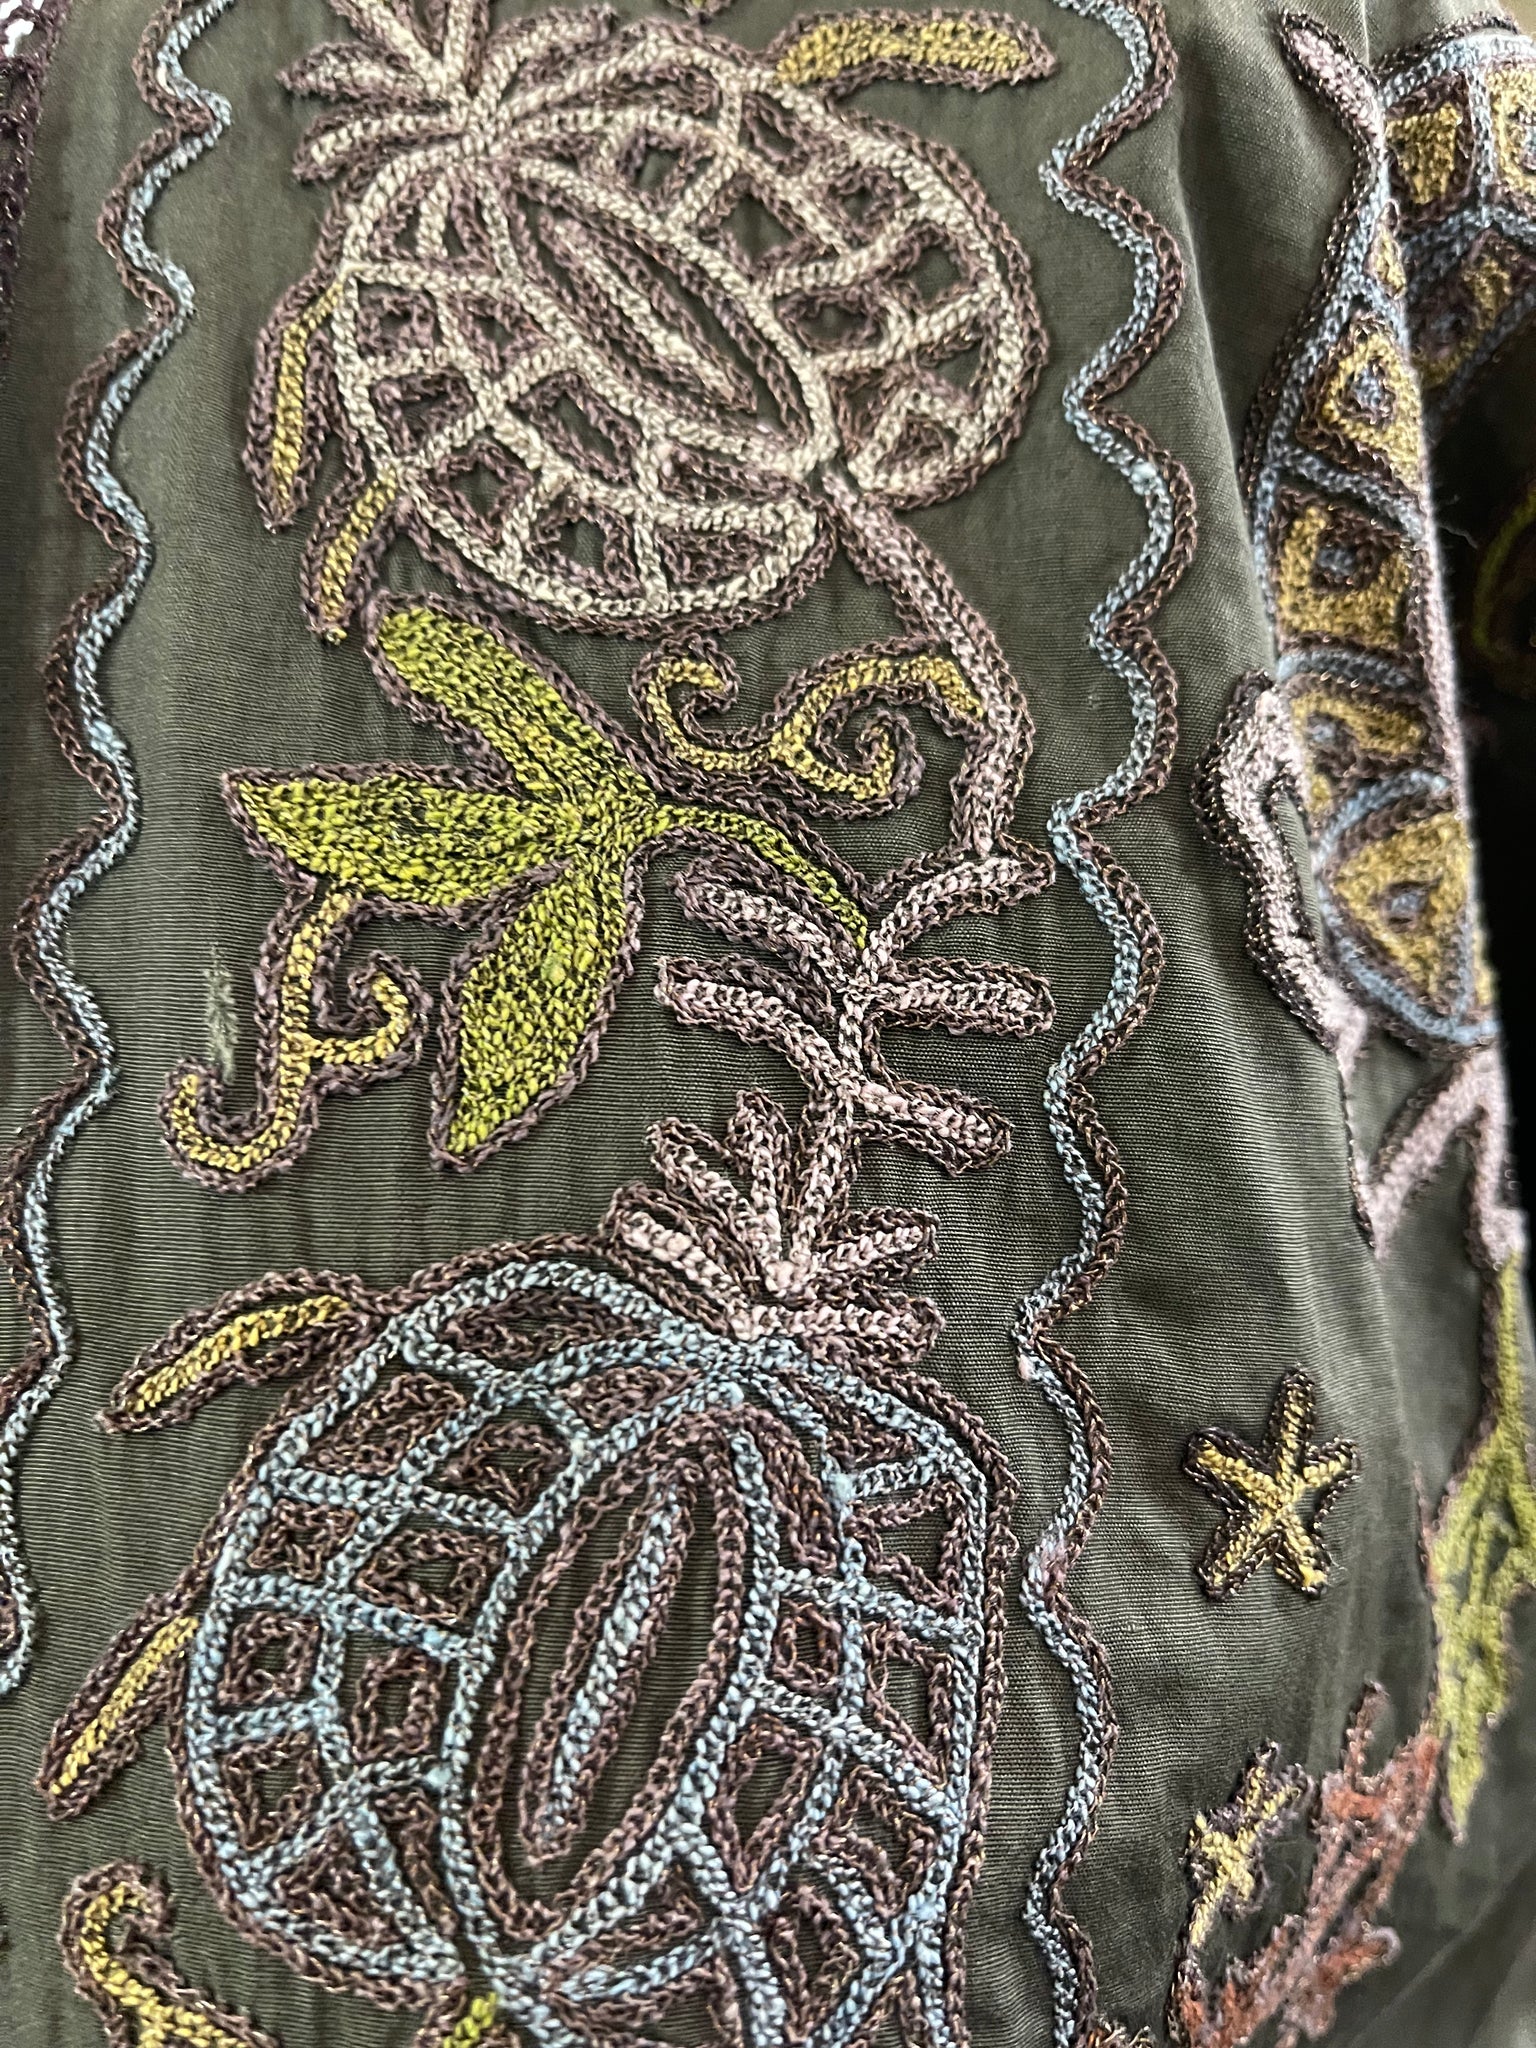  Ottoman Turkish Early 20th Century Embroidered Robe DETAIL 6 of 6